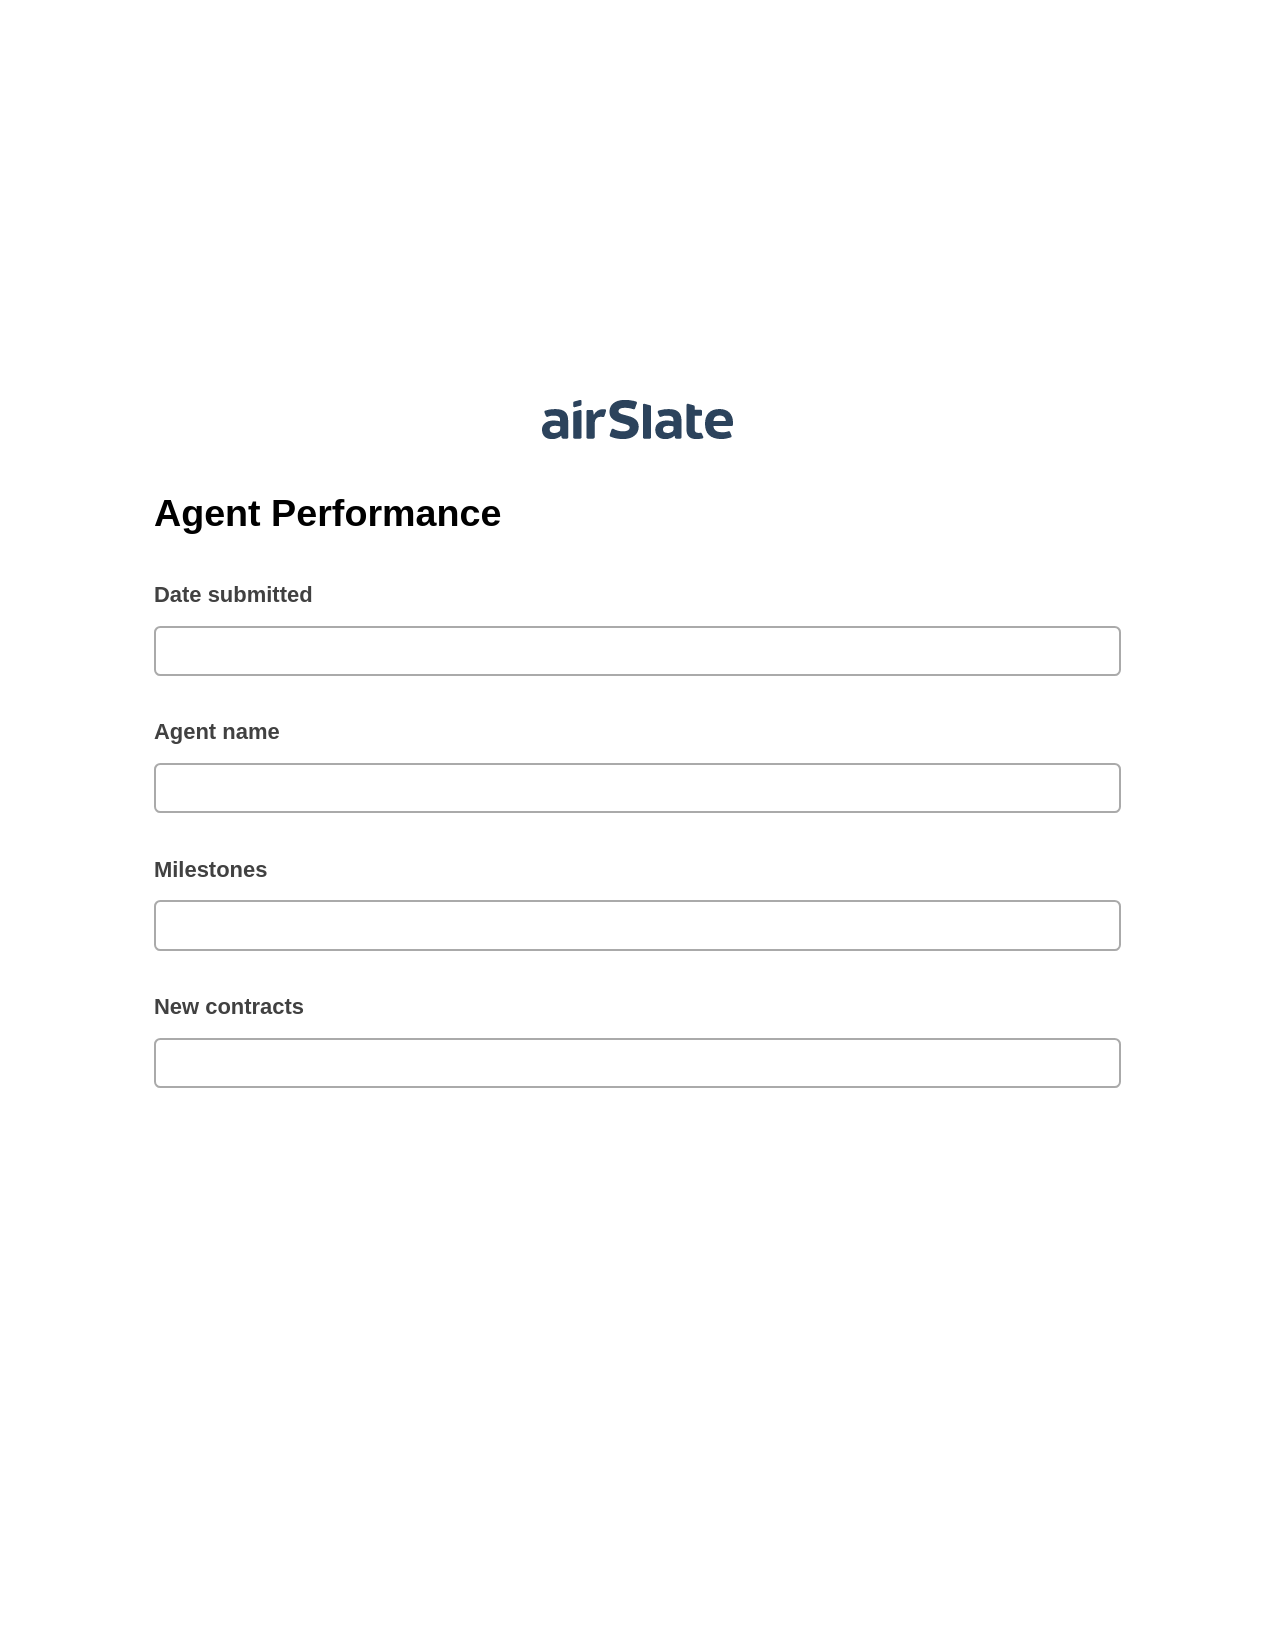 Agent Performance Pre-fill from AirTable Bot, Update NetSuite Record Bot, Export to WebMerge Bot